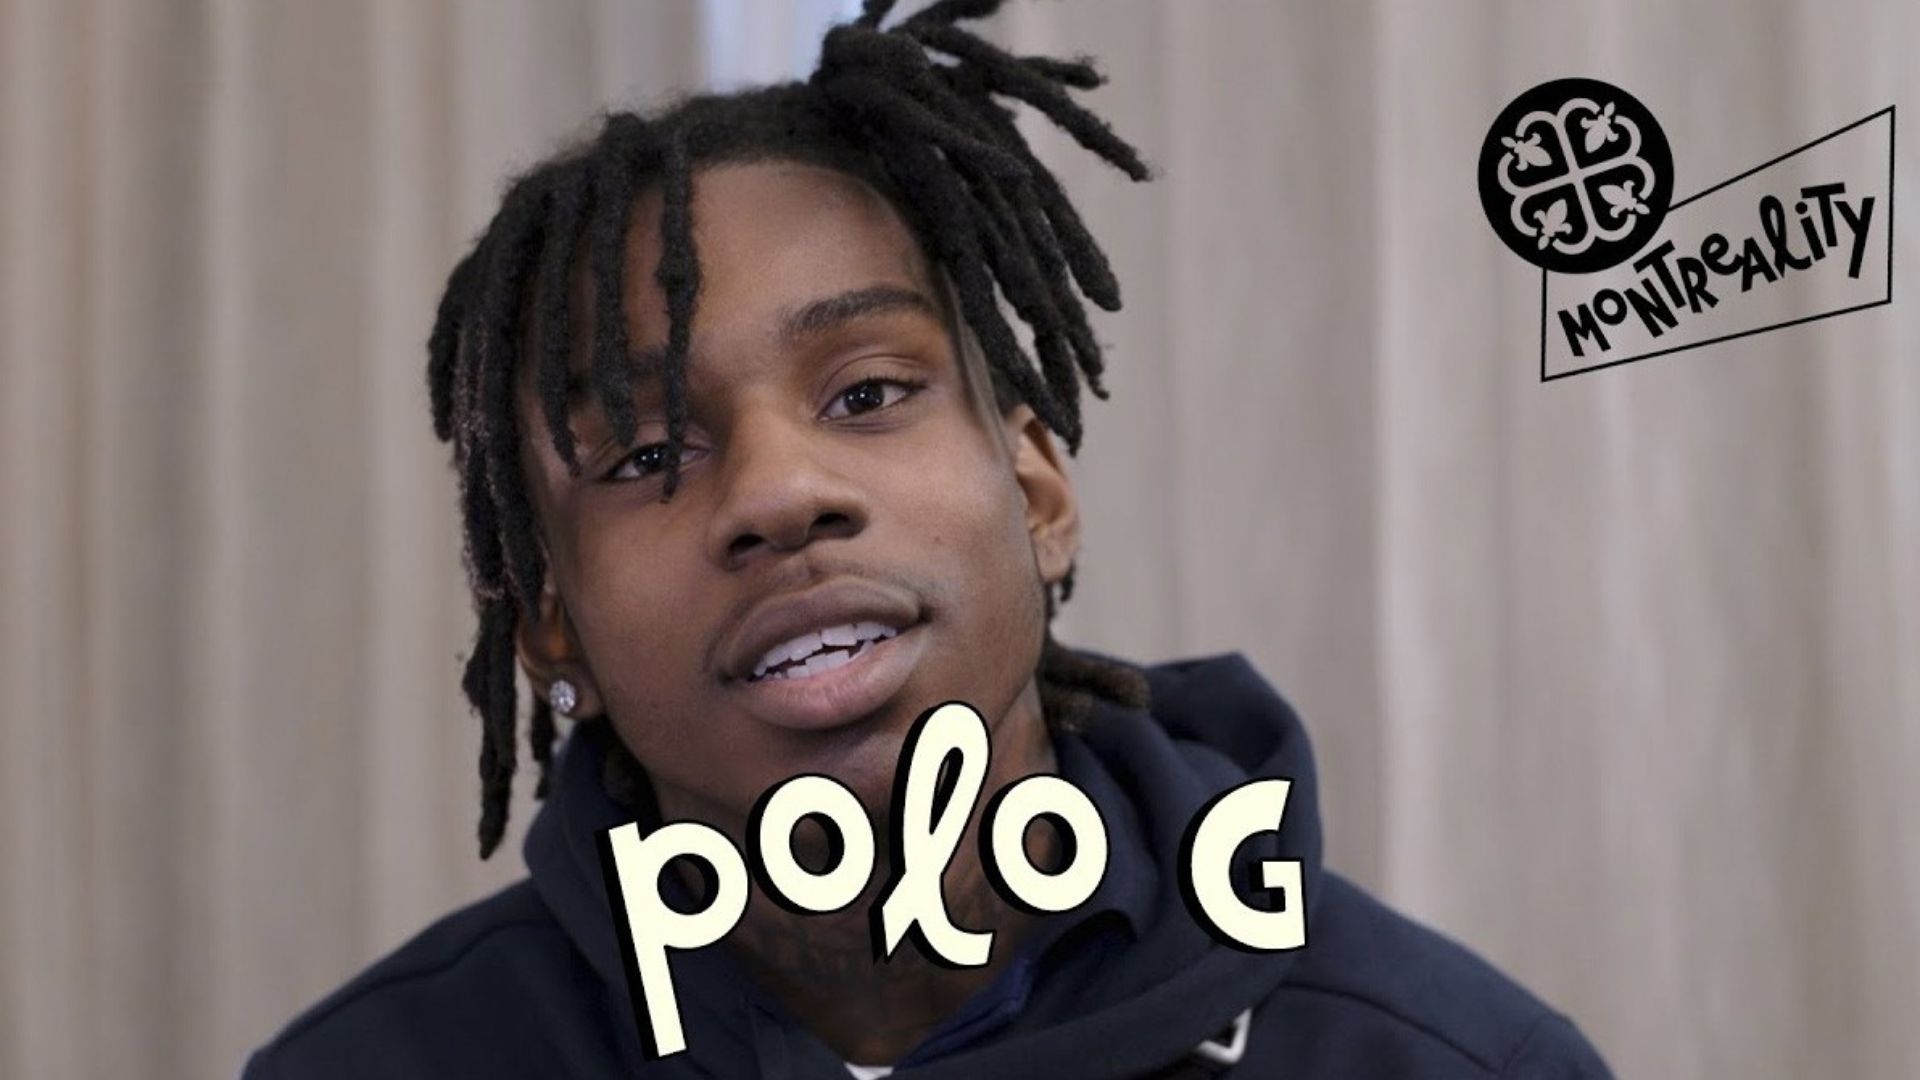 Polo G Wallpapers - Wallpaper Cave